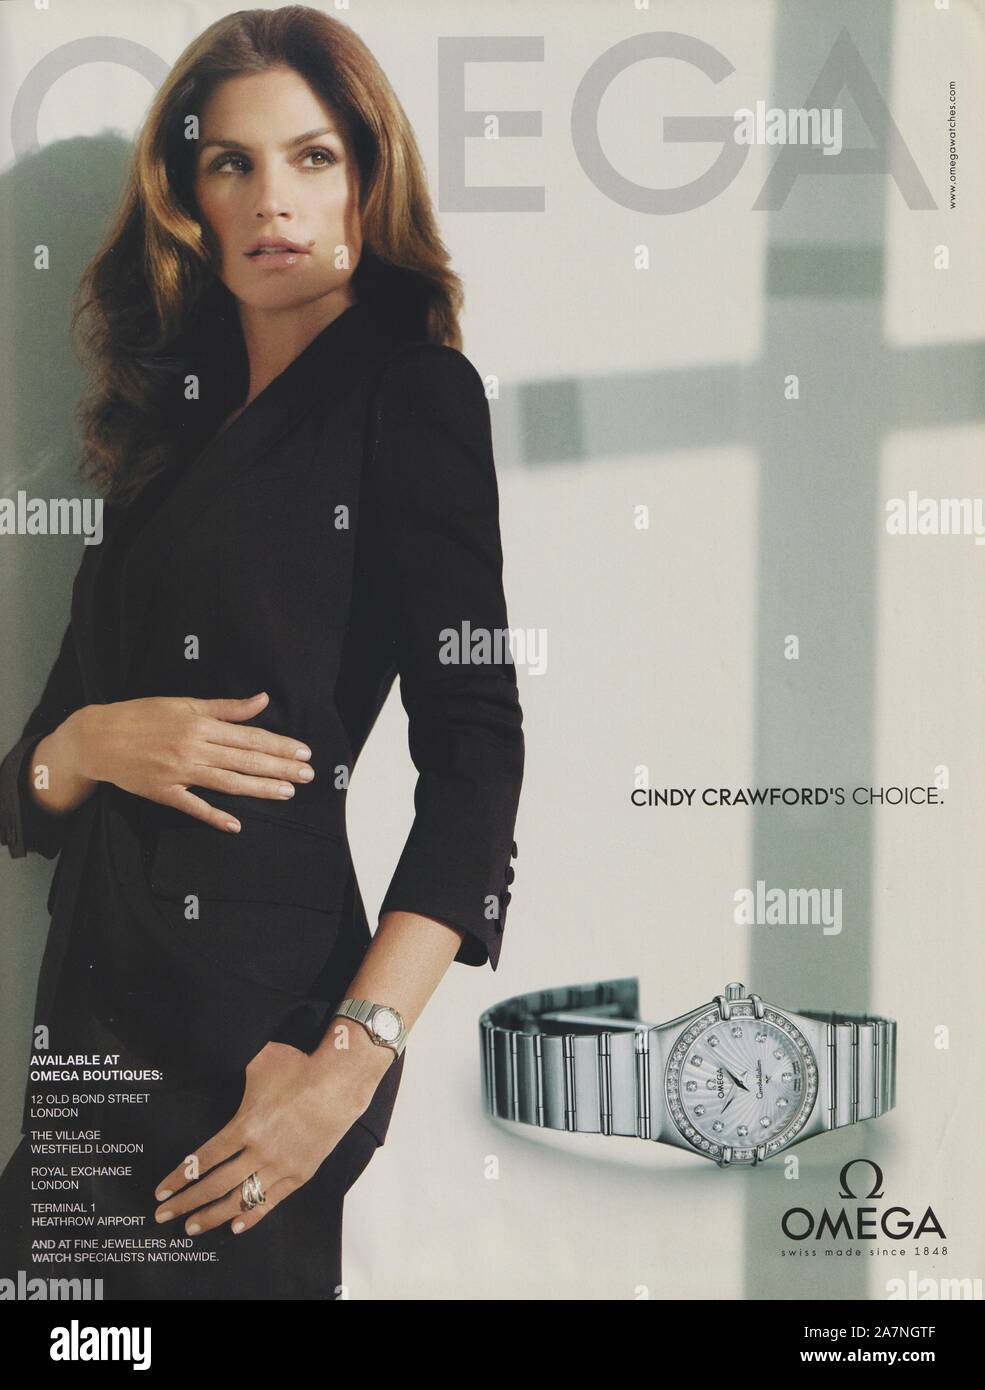 poster advertising OMEGA watch with Cindy Crawford in paper magazine from 2009 year, advertisement, creative OMEGA 2000s advert Stock Photo